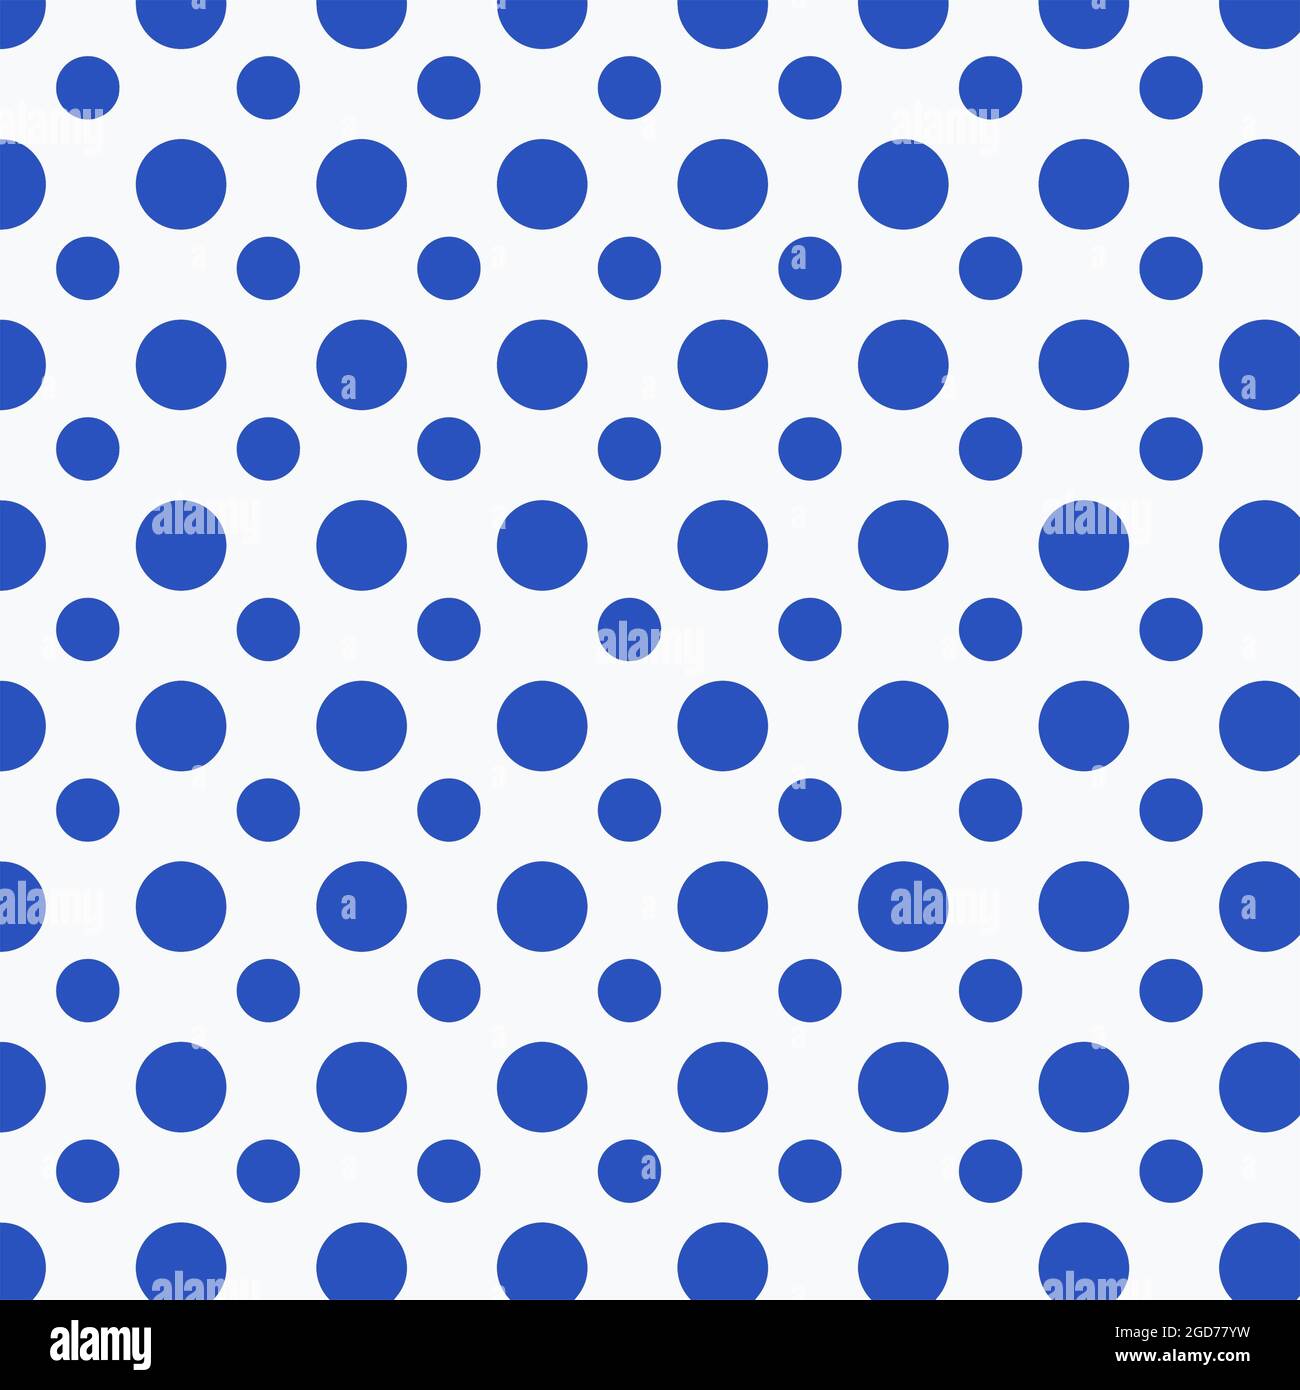 Cerulean blue and white polka dots pattern in 12x12 design element backgrounds. Stock Photo